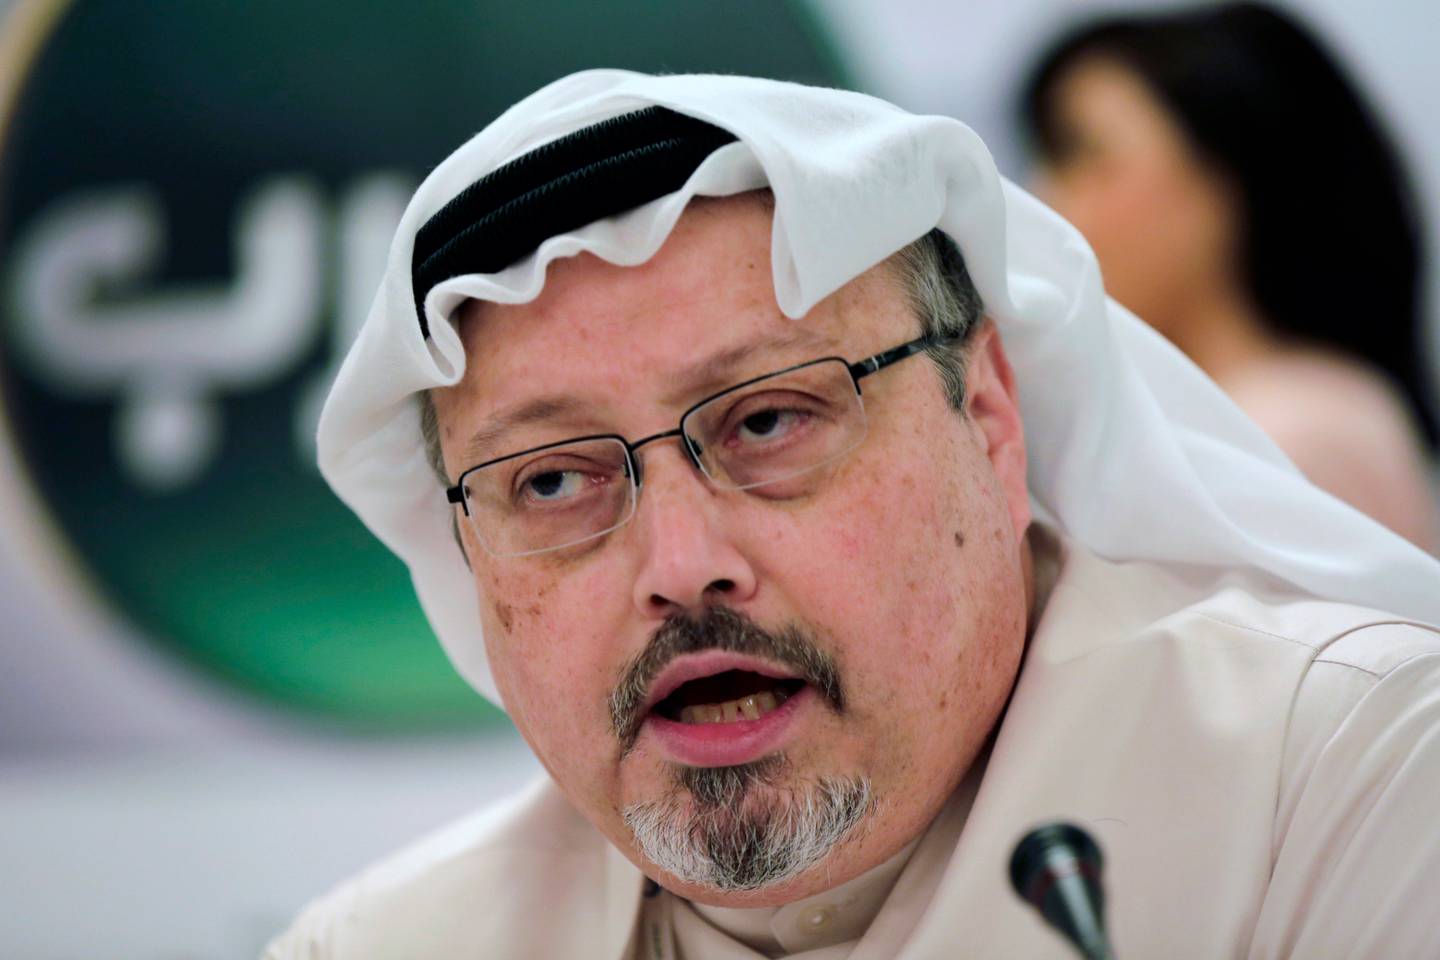 Jamal Khashoggi, who wrote critically about the Saudi crown prince, was murdered inside the Saudi Consulate in Istanbul in October 2018. Photo / AP